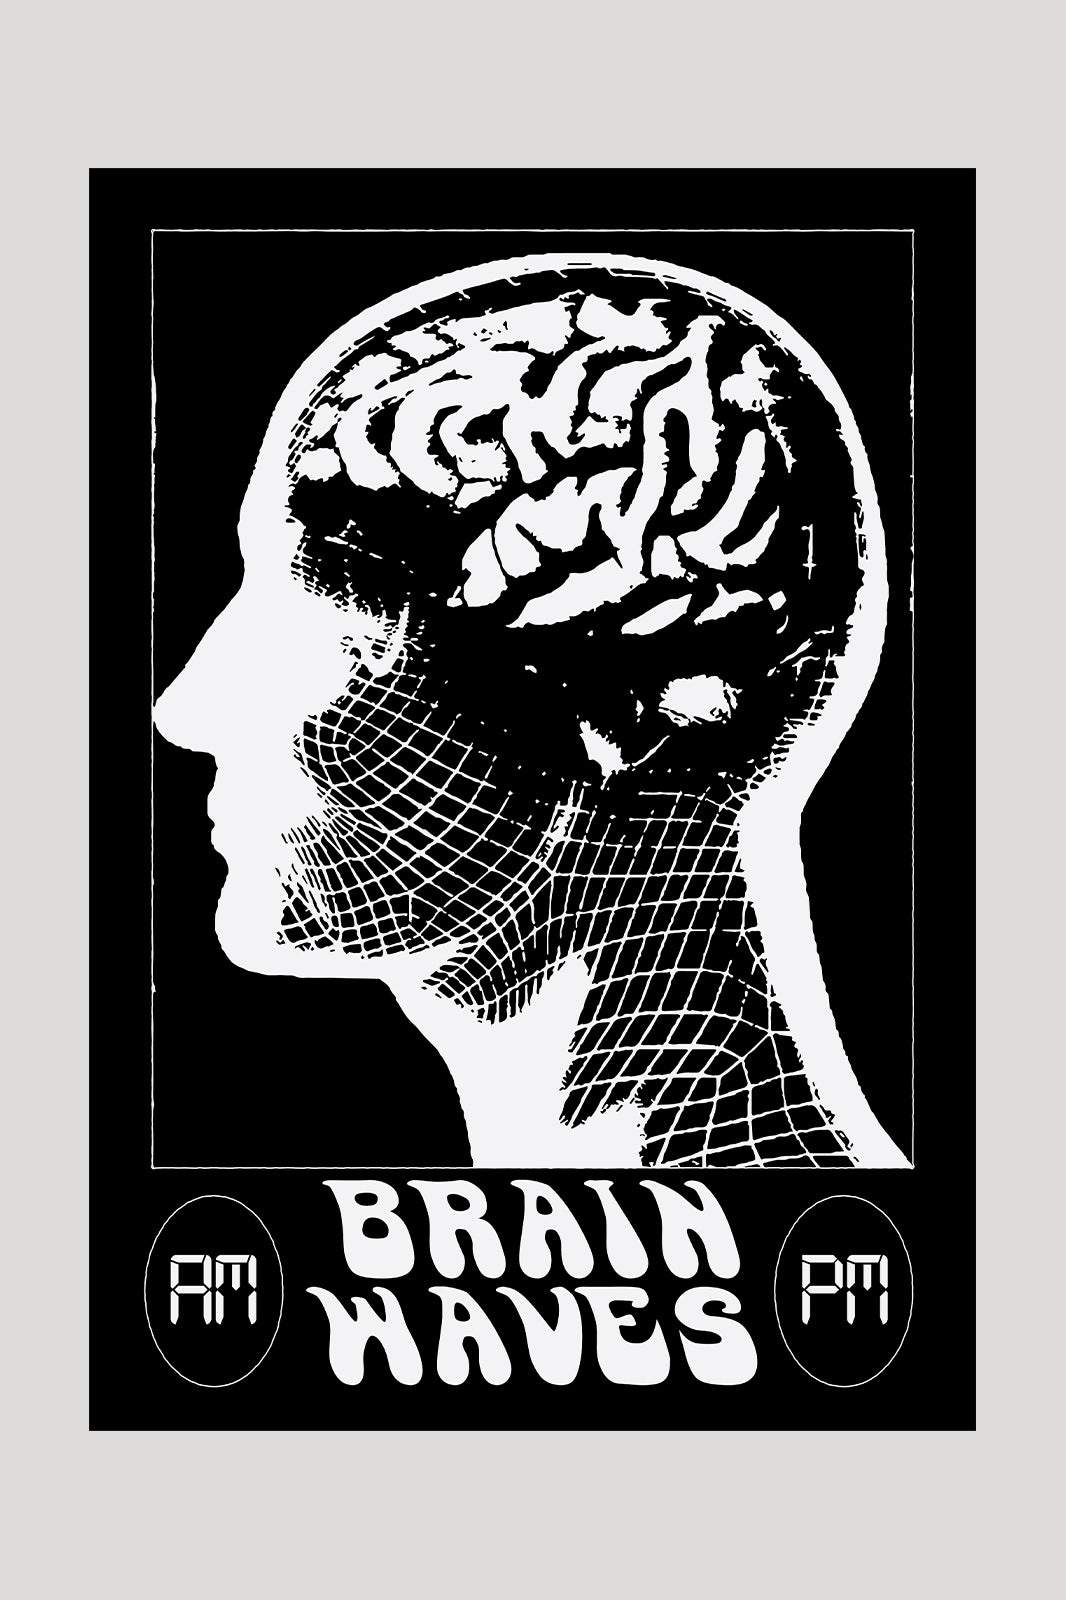 Flat preview of the Duties Brain Waves print poster featuring a black and white illustration of a translucent human head, with a text saying 'BRAIN WAVES'